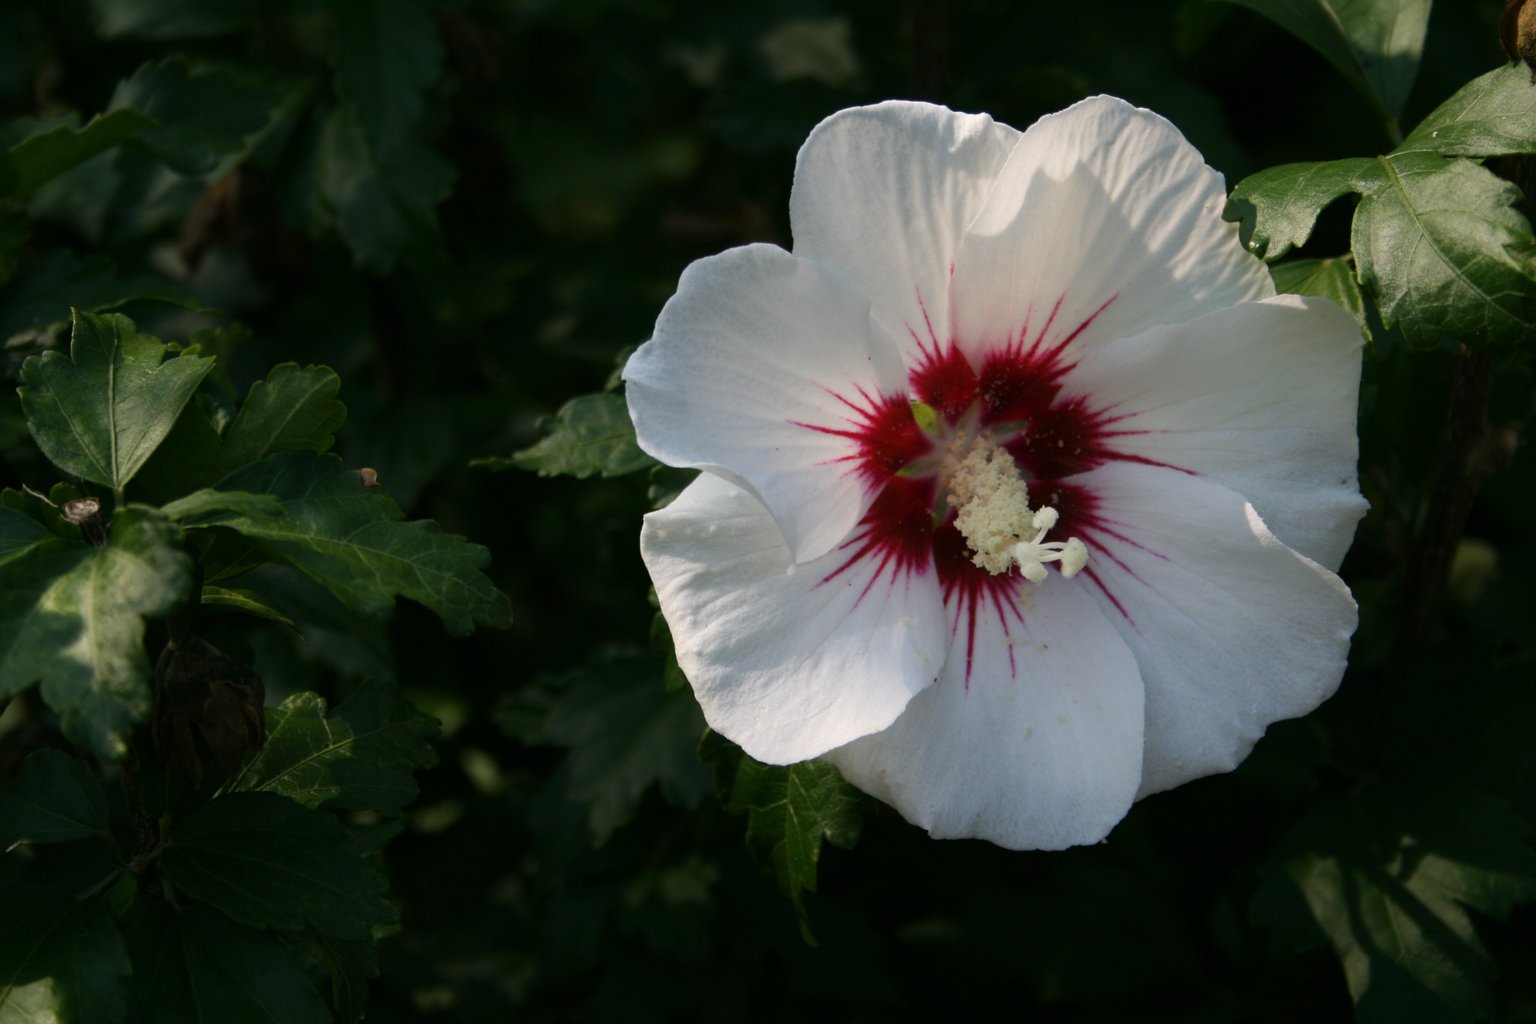 Ketmia syryjska "Red Heart" / Hibiscus syriacus "Red Heart"